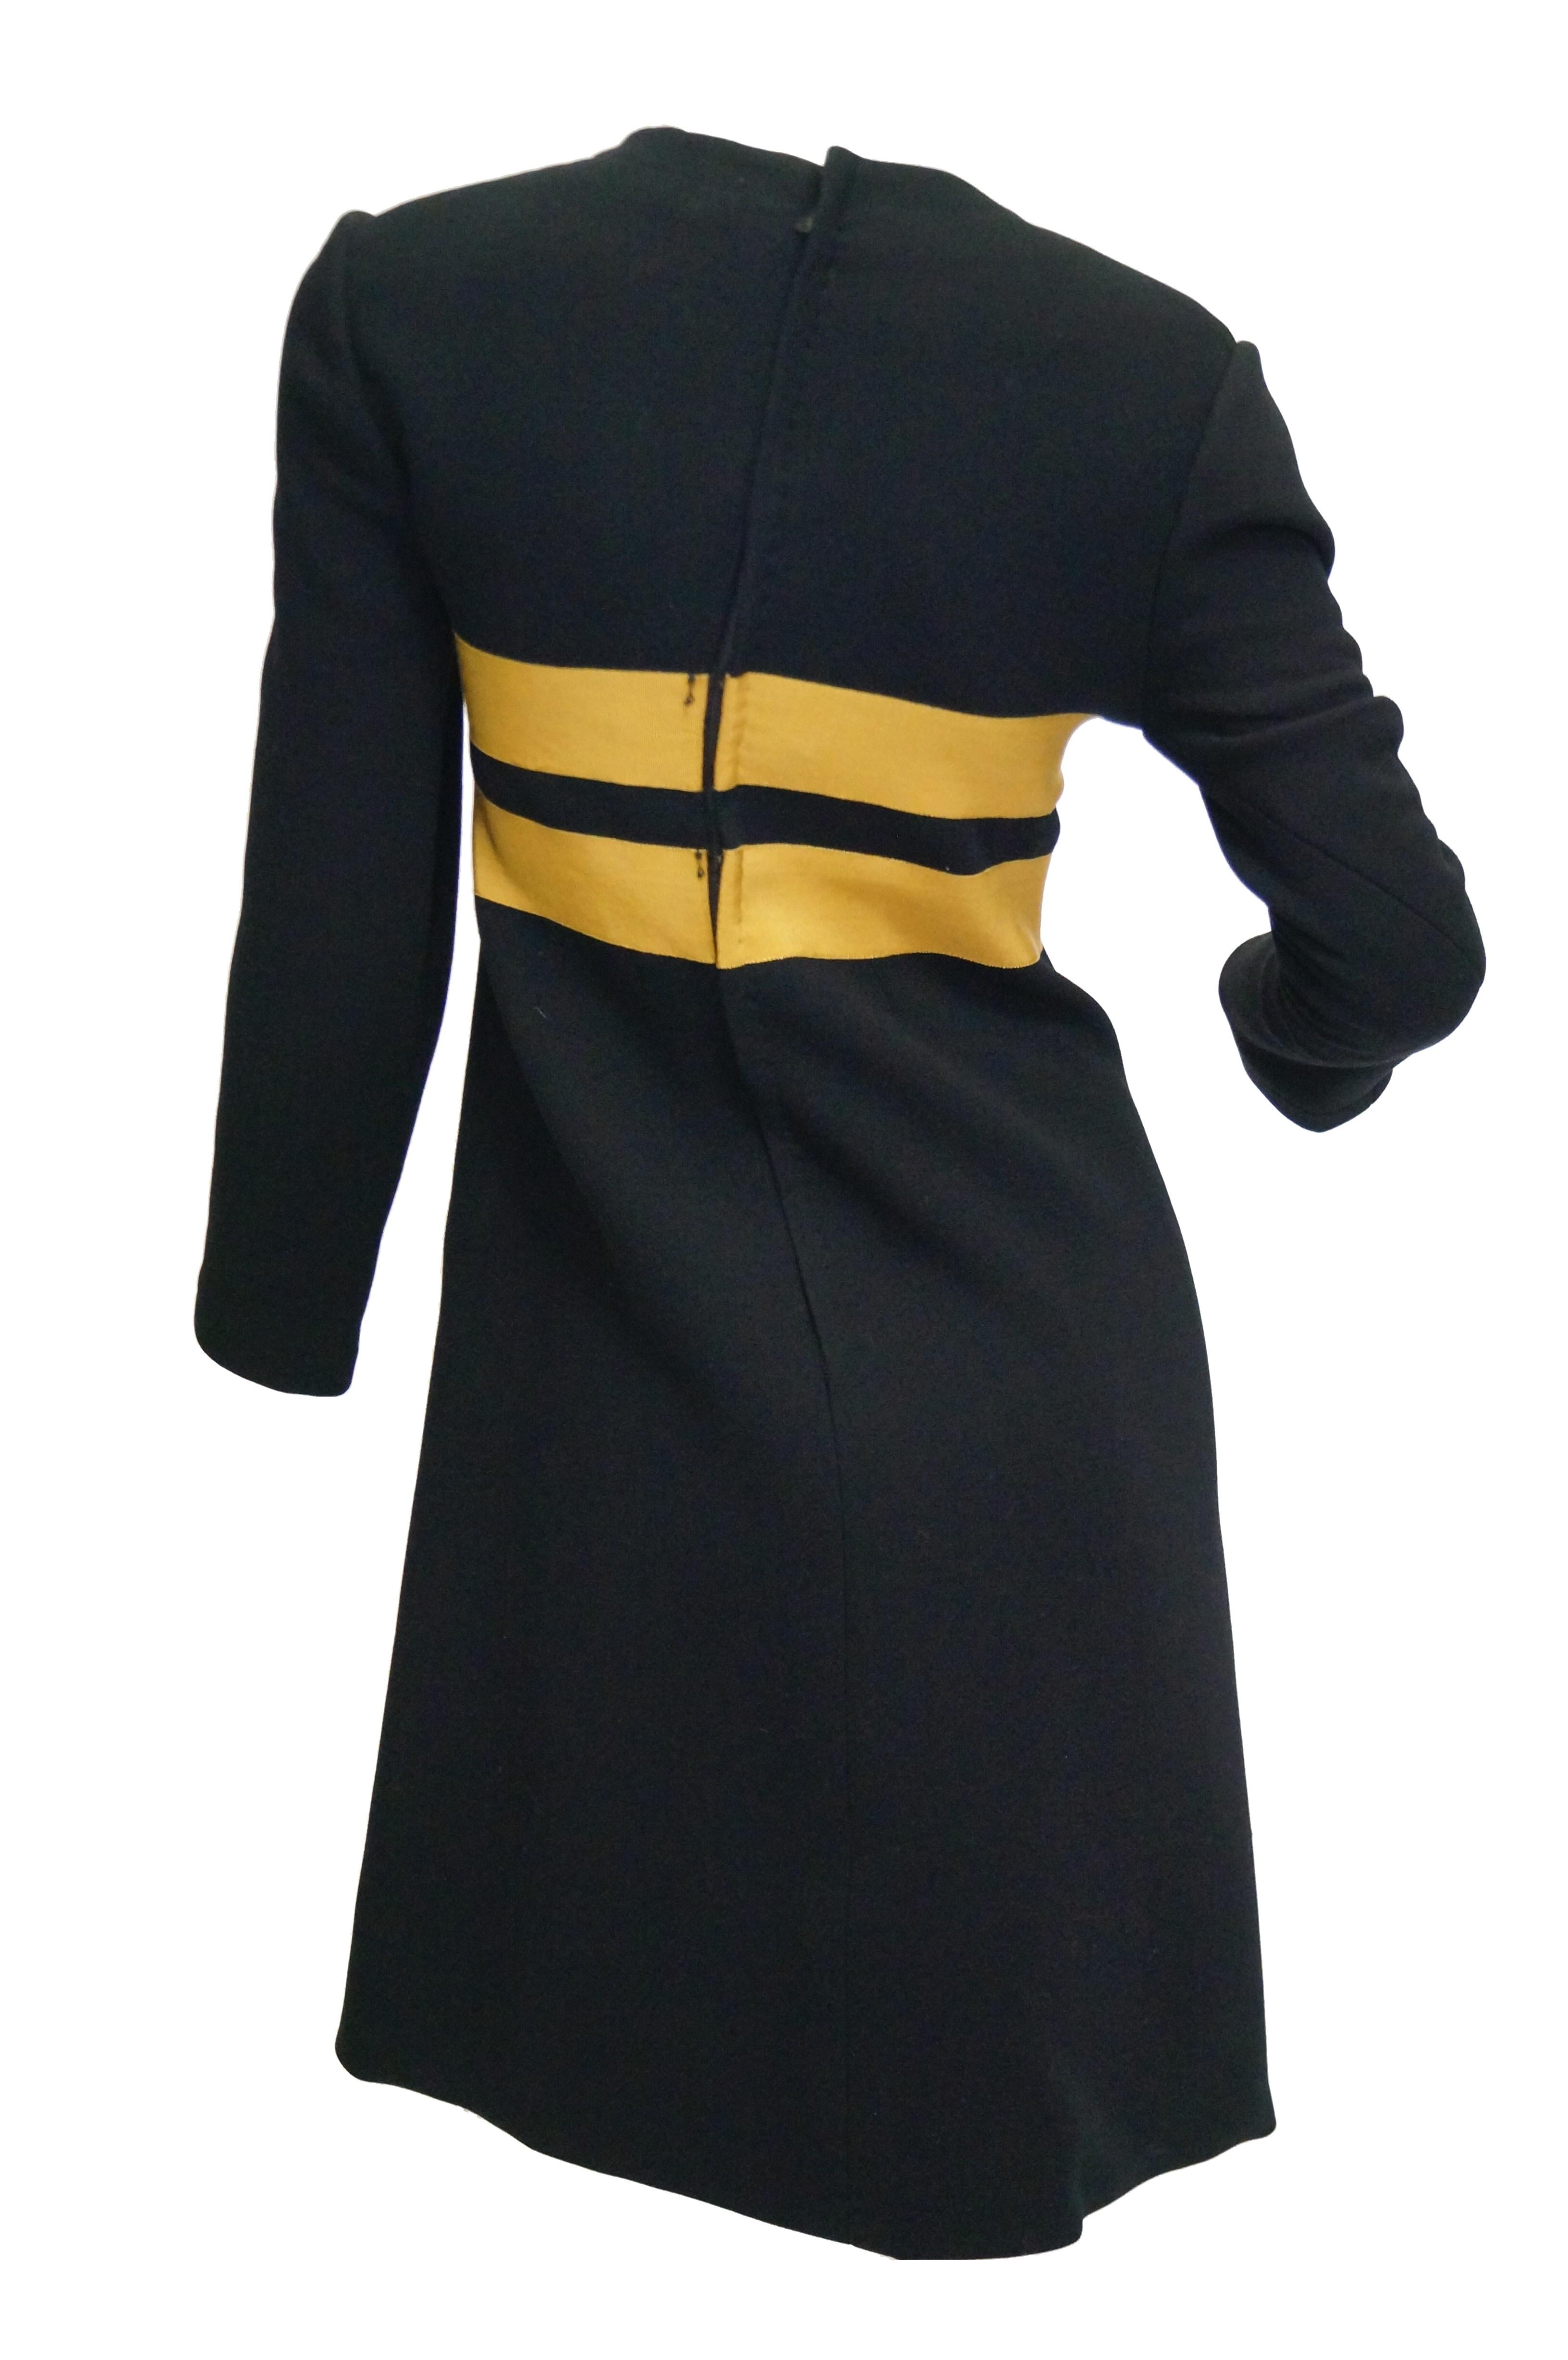 Wonderfully Mod dress created by Jeanne Lanvin and executed  with authorization by Maria Carine.  The black wool dress has a loose shift silhouette, jewel neckline, long sleeves, and falls just above the knee. The bust of the dress features two